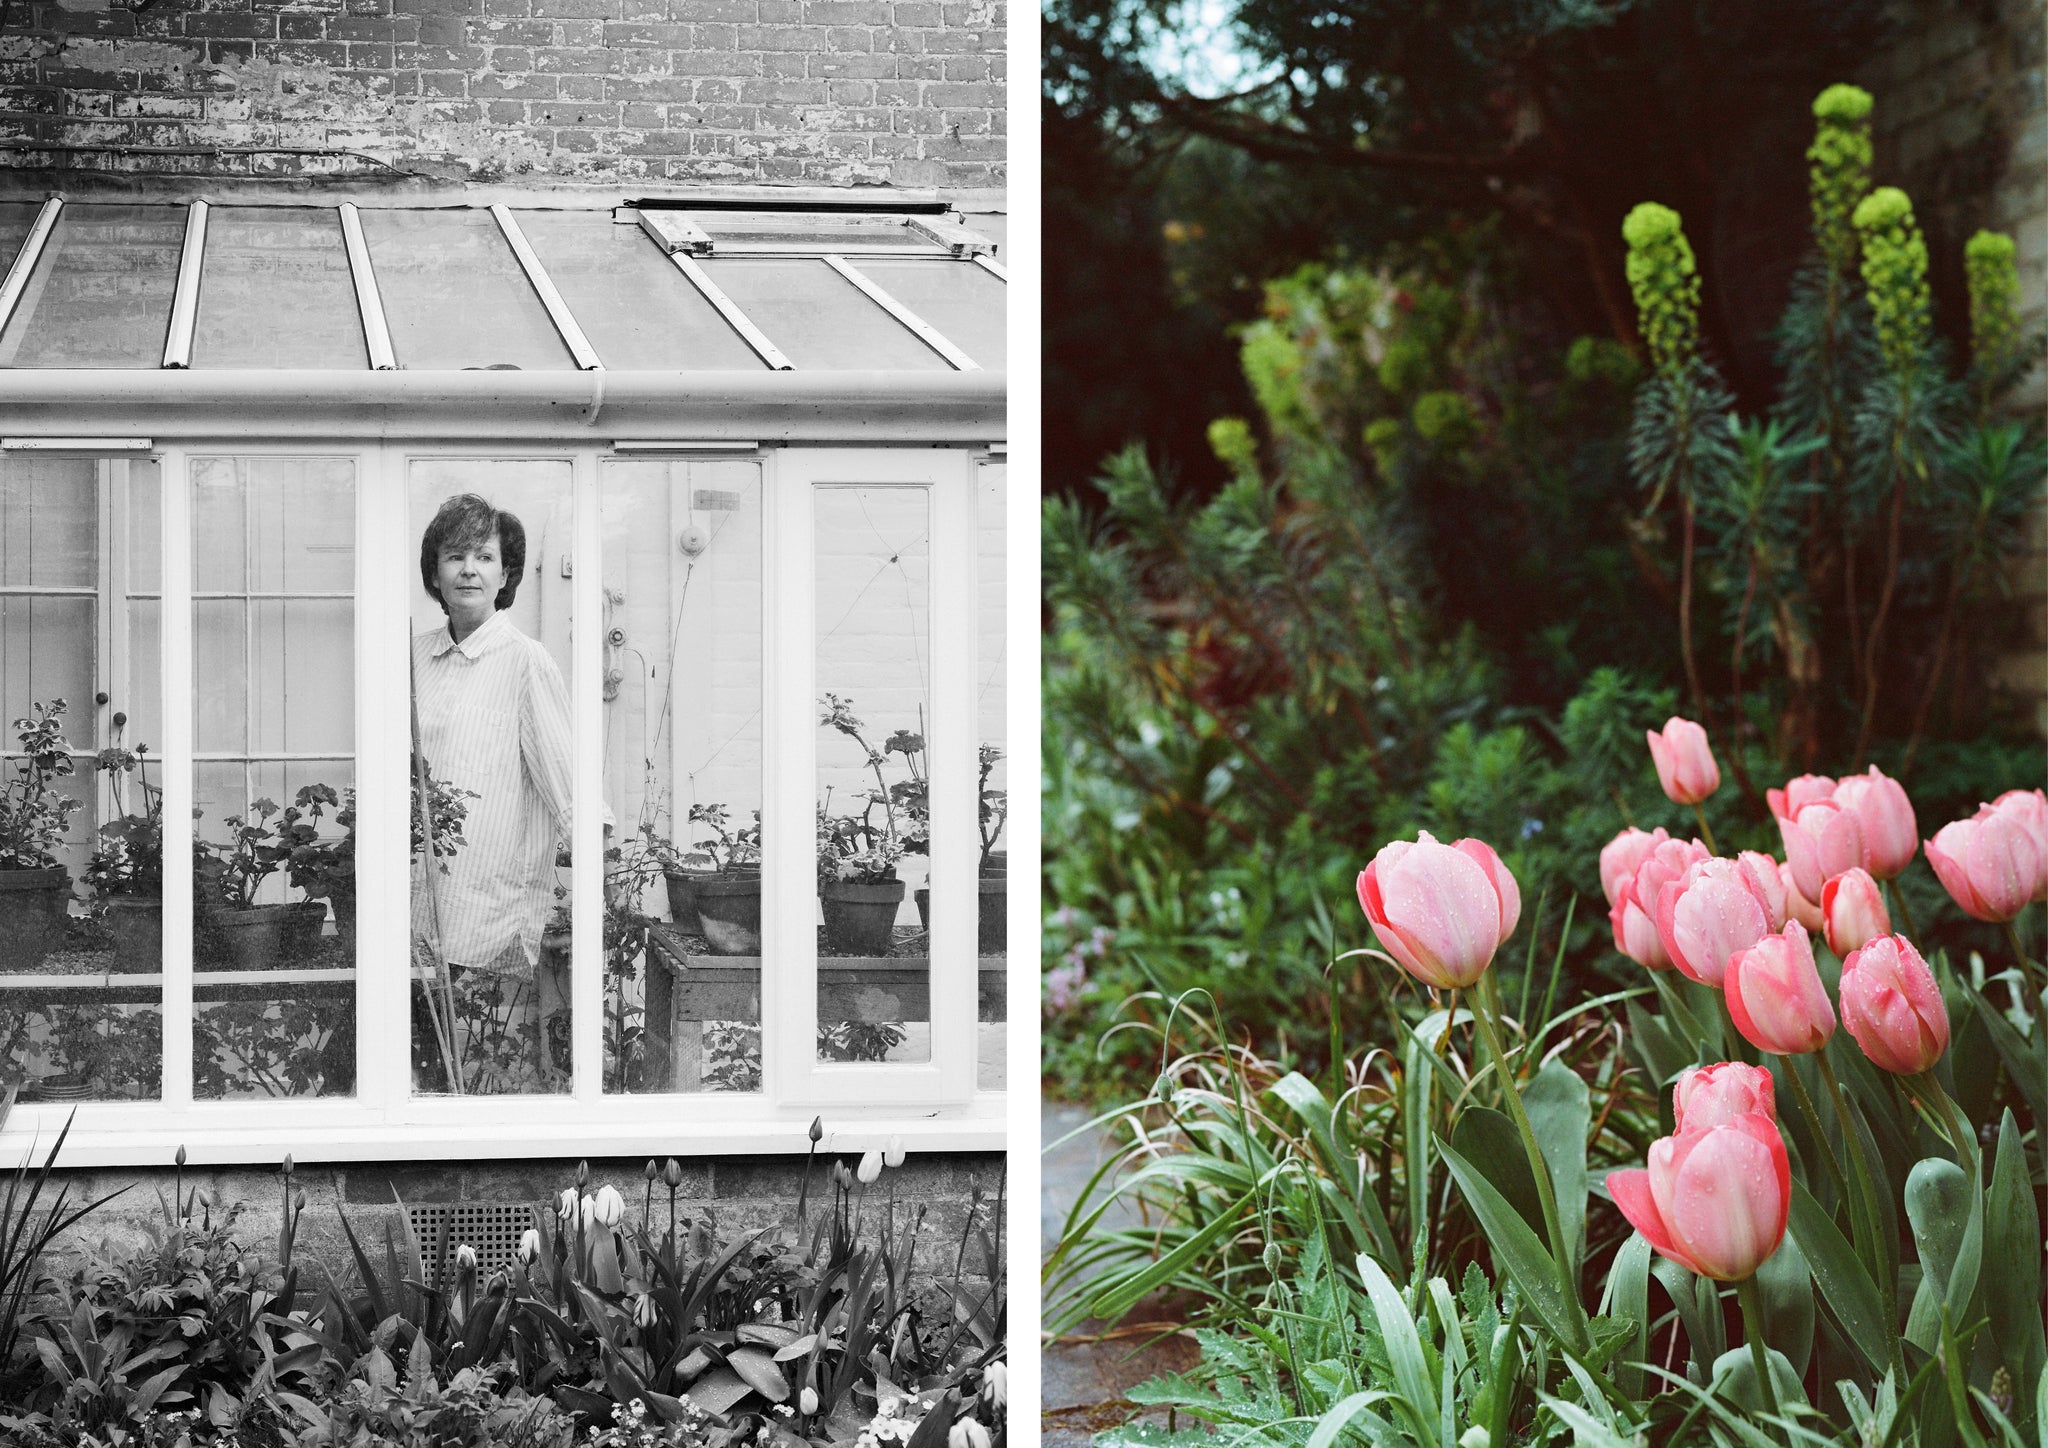 Female author in her conservatory and pink flowers